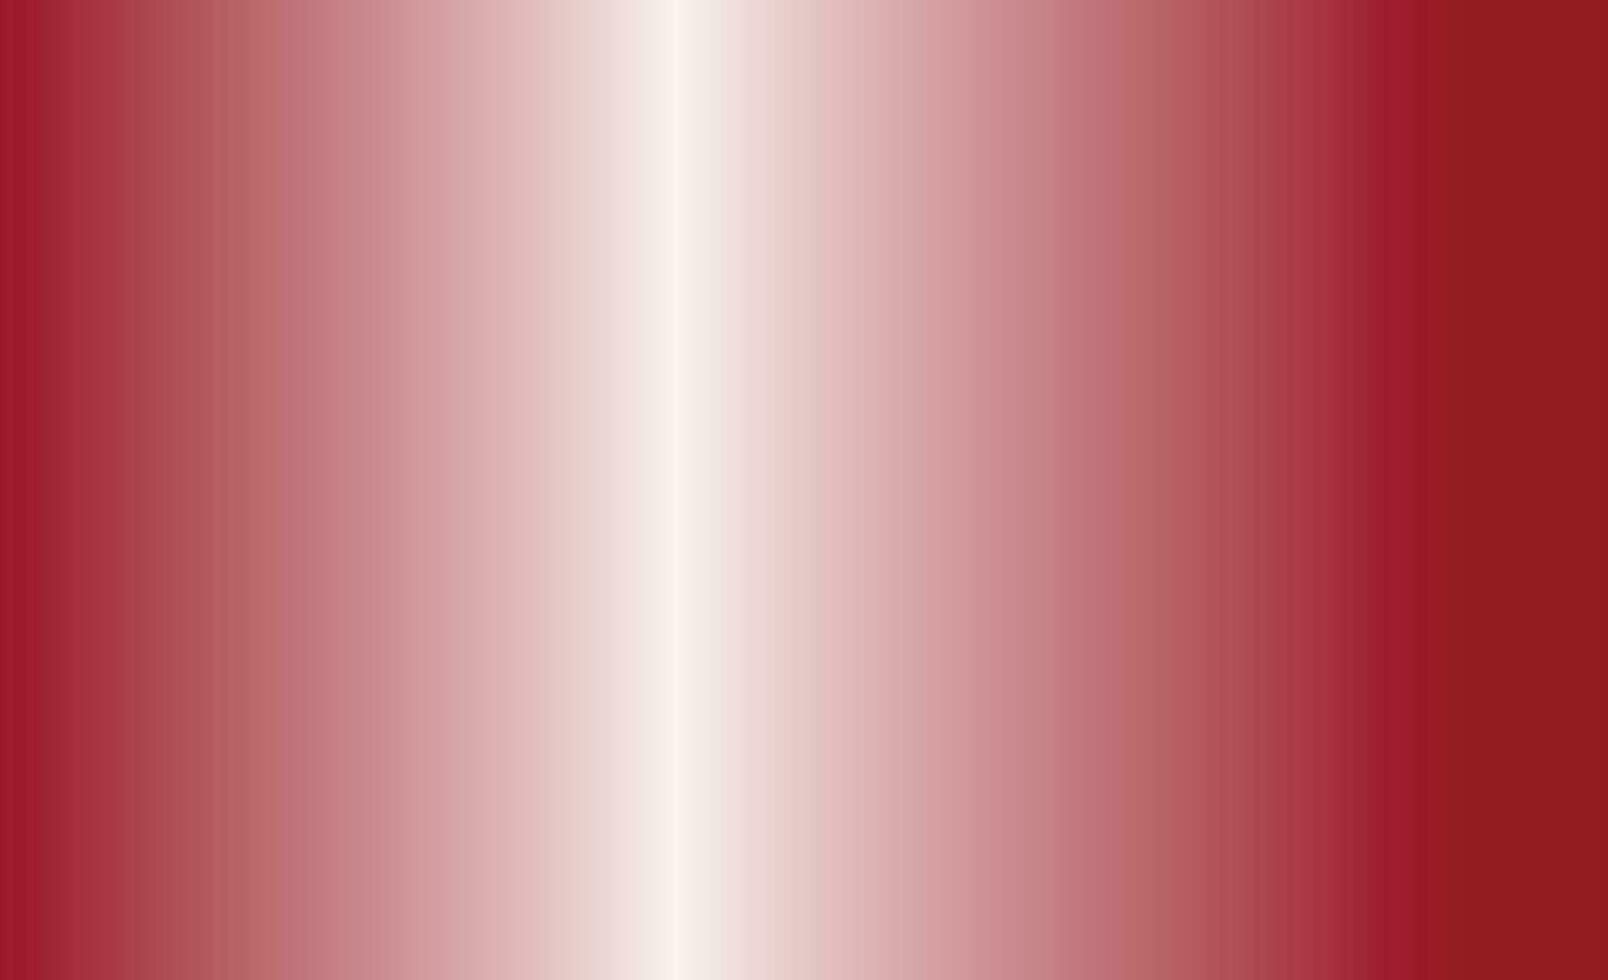 Red and White Gradient Abstract Blurred Colorful Background Vector Illustration